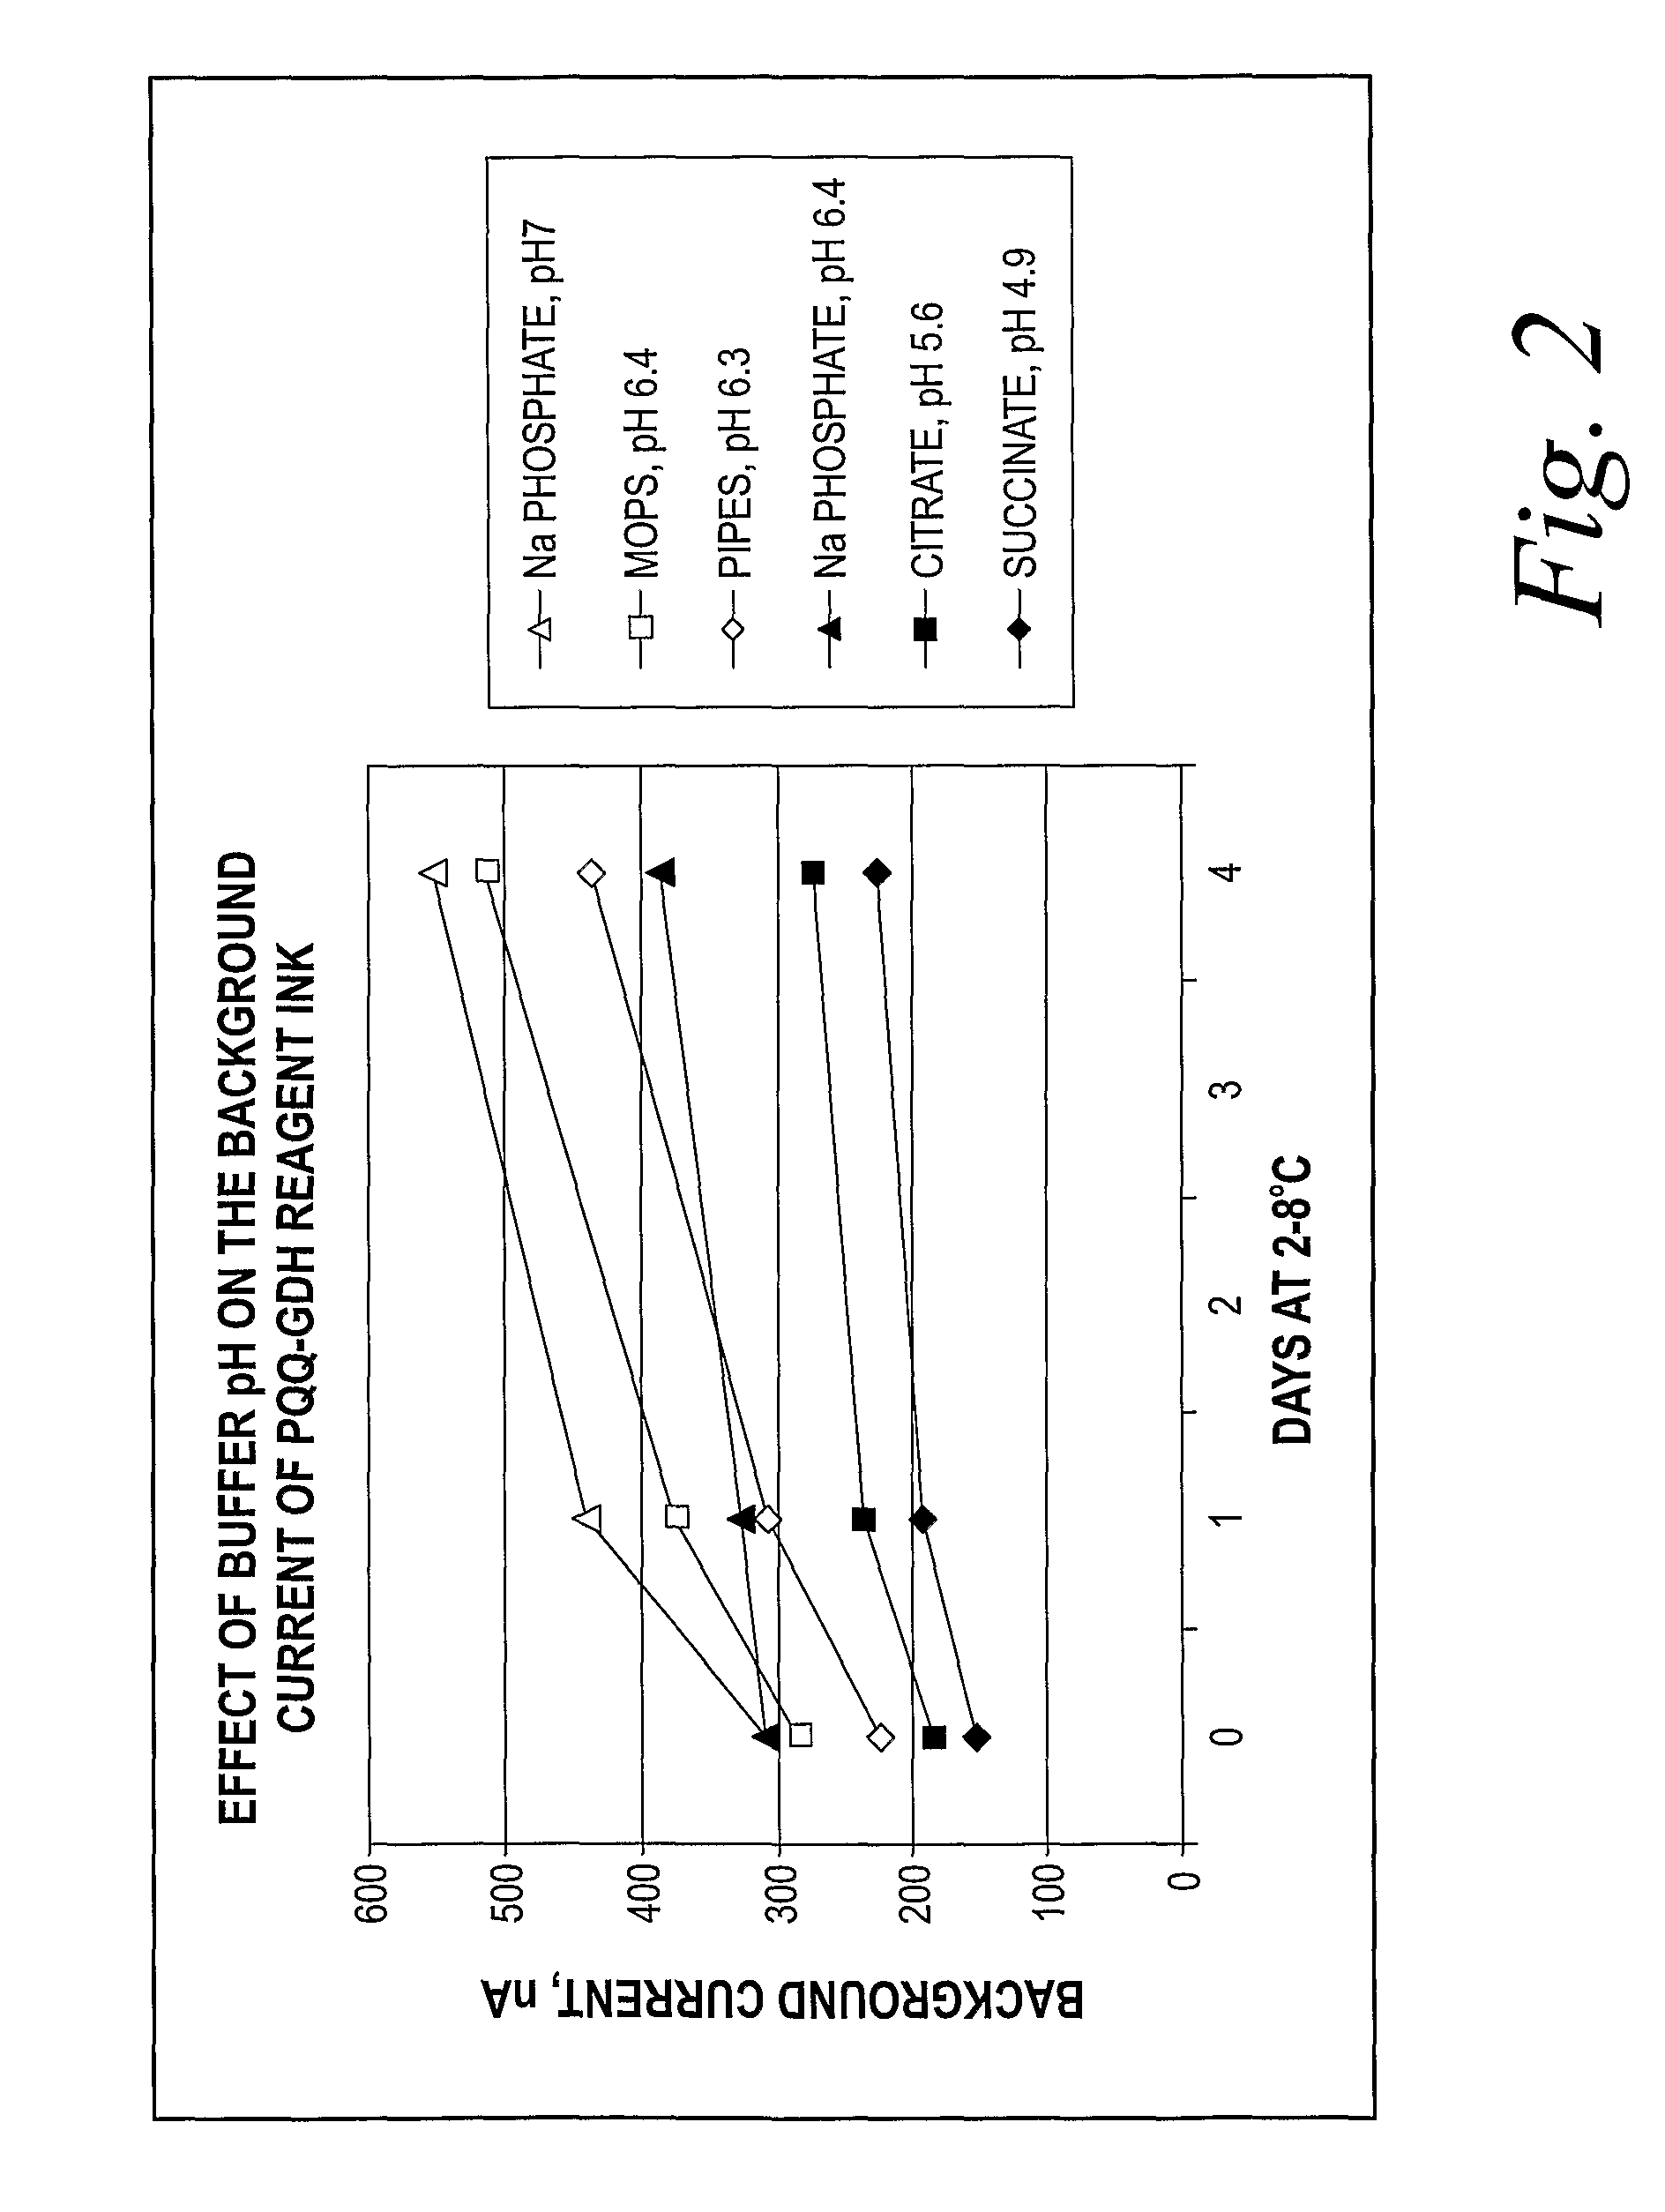 Reagent composition for electrochemical biosensors